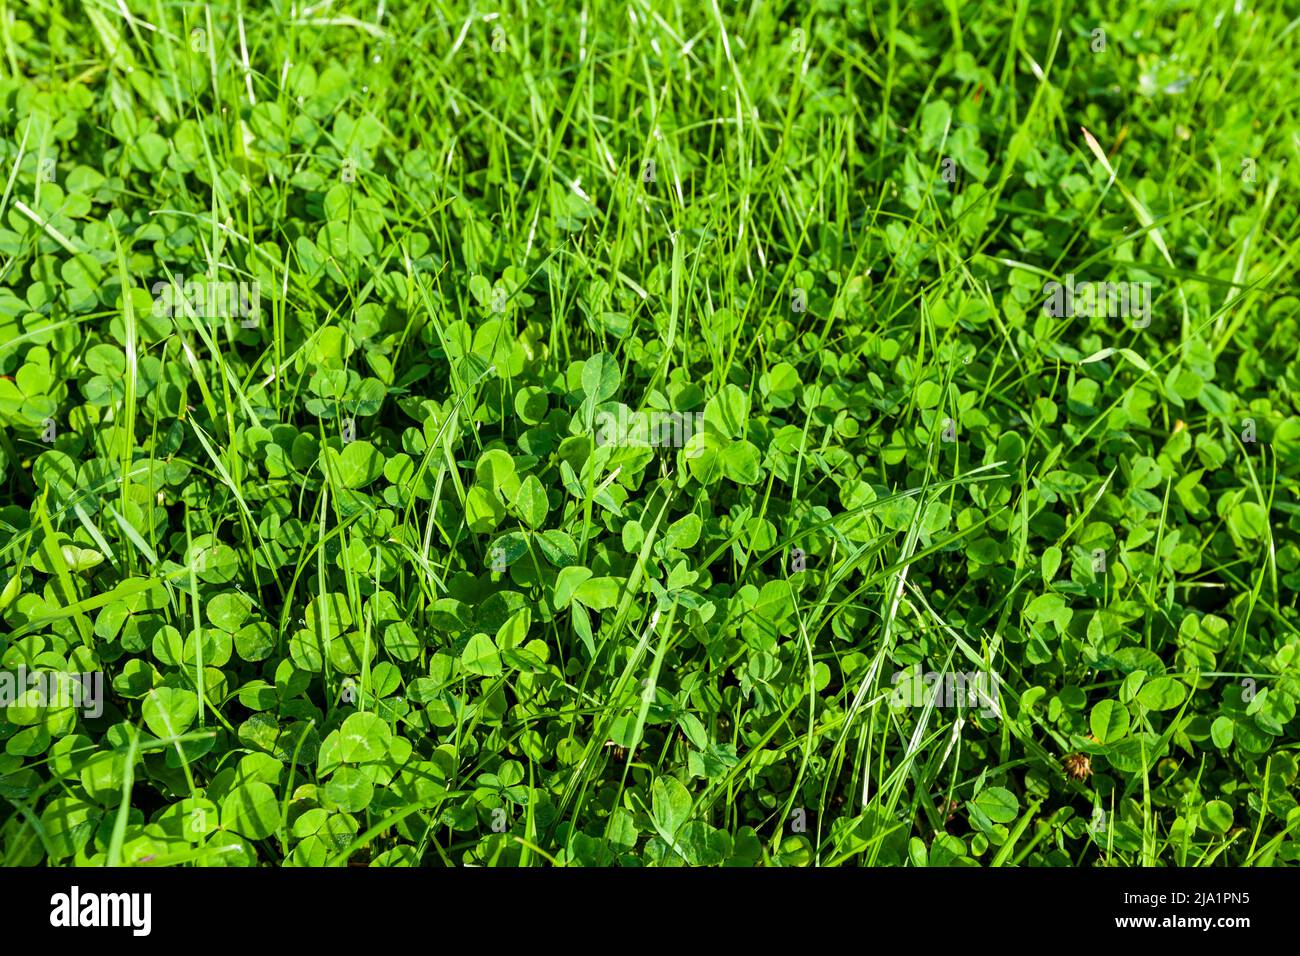 Fresh green summer meadow background, natural photo with grass and clover leaves Stock Photo